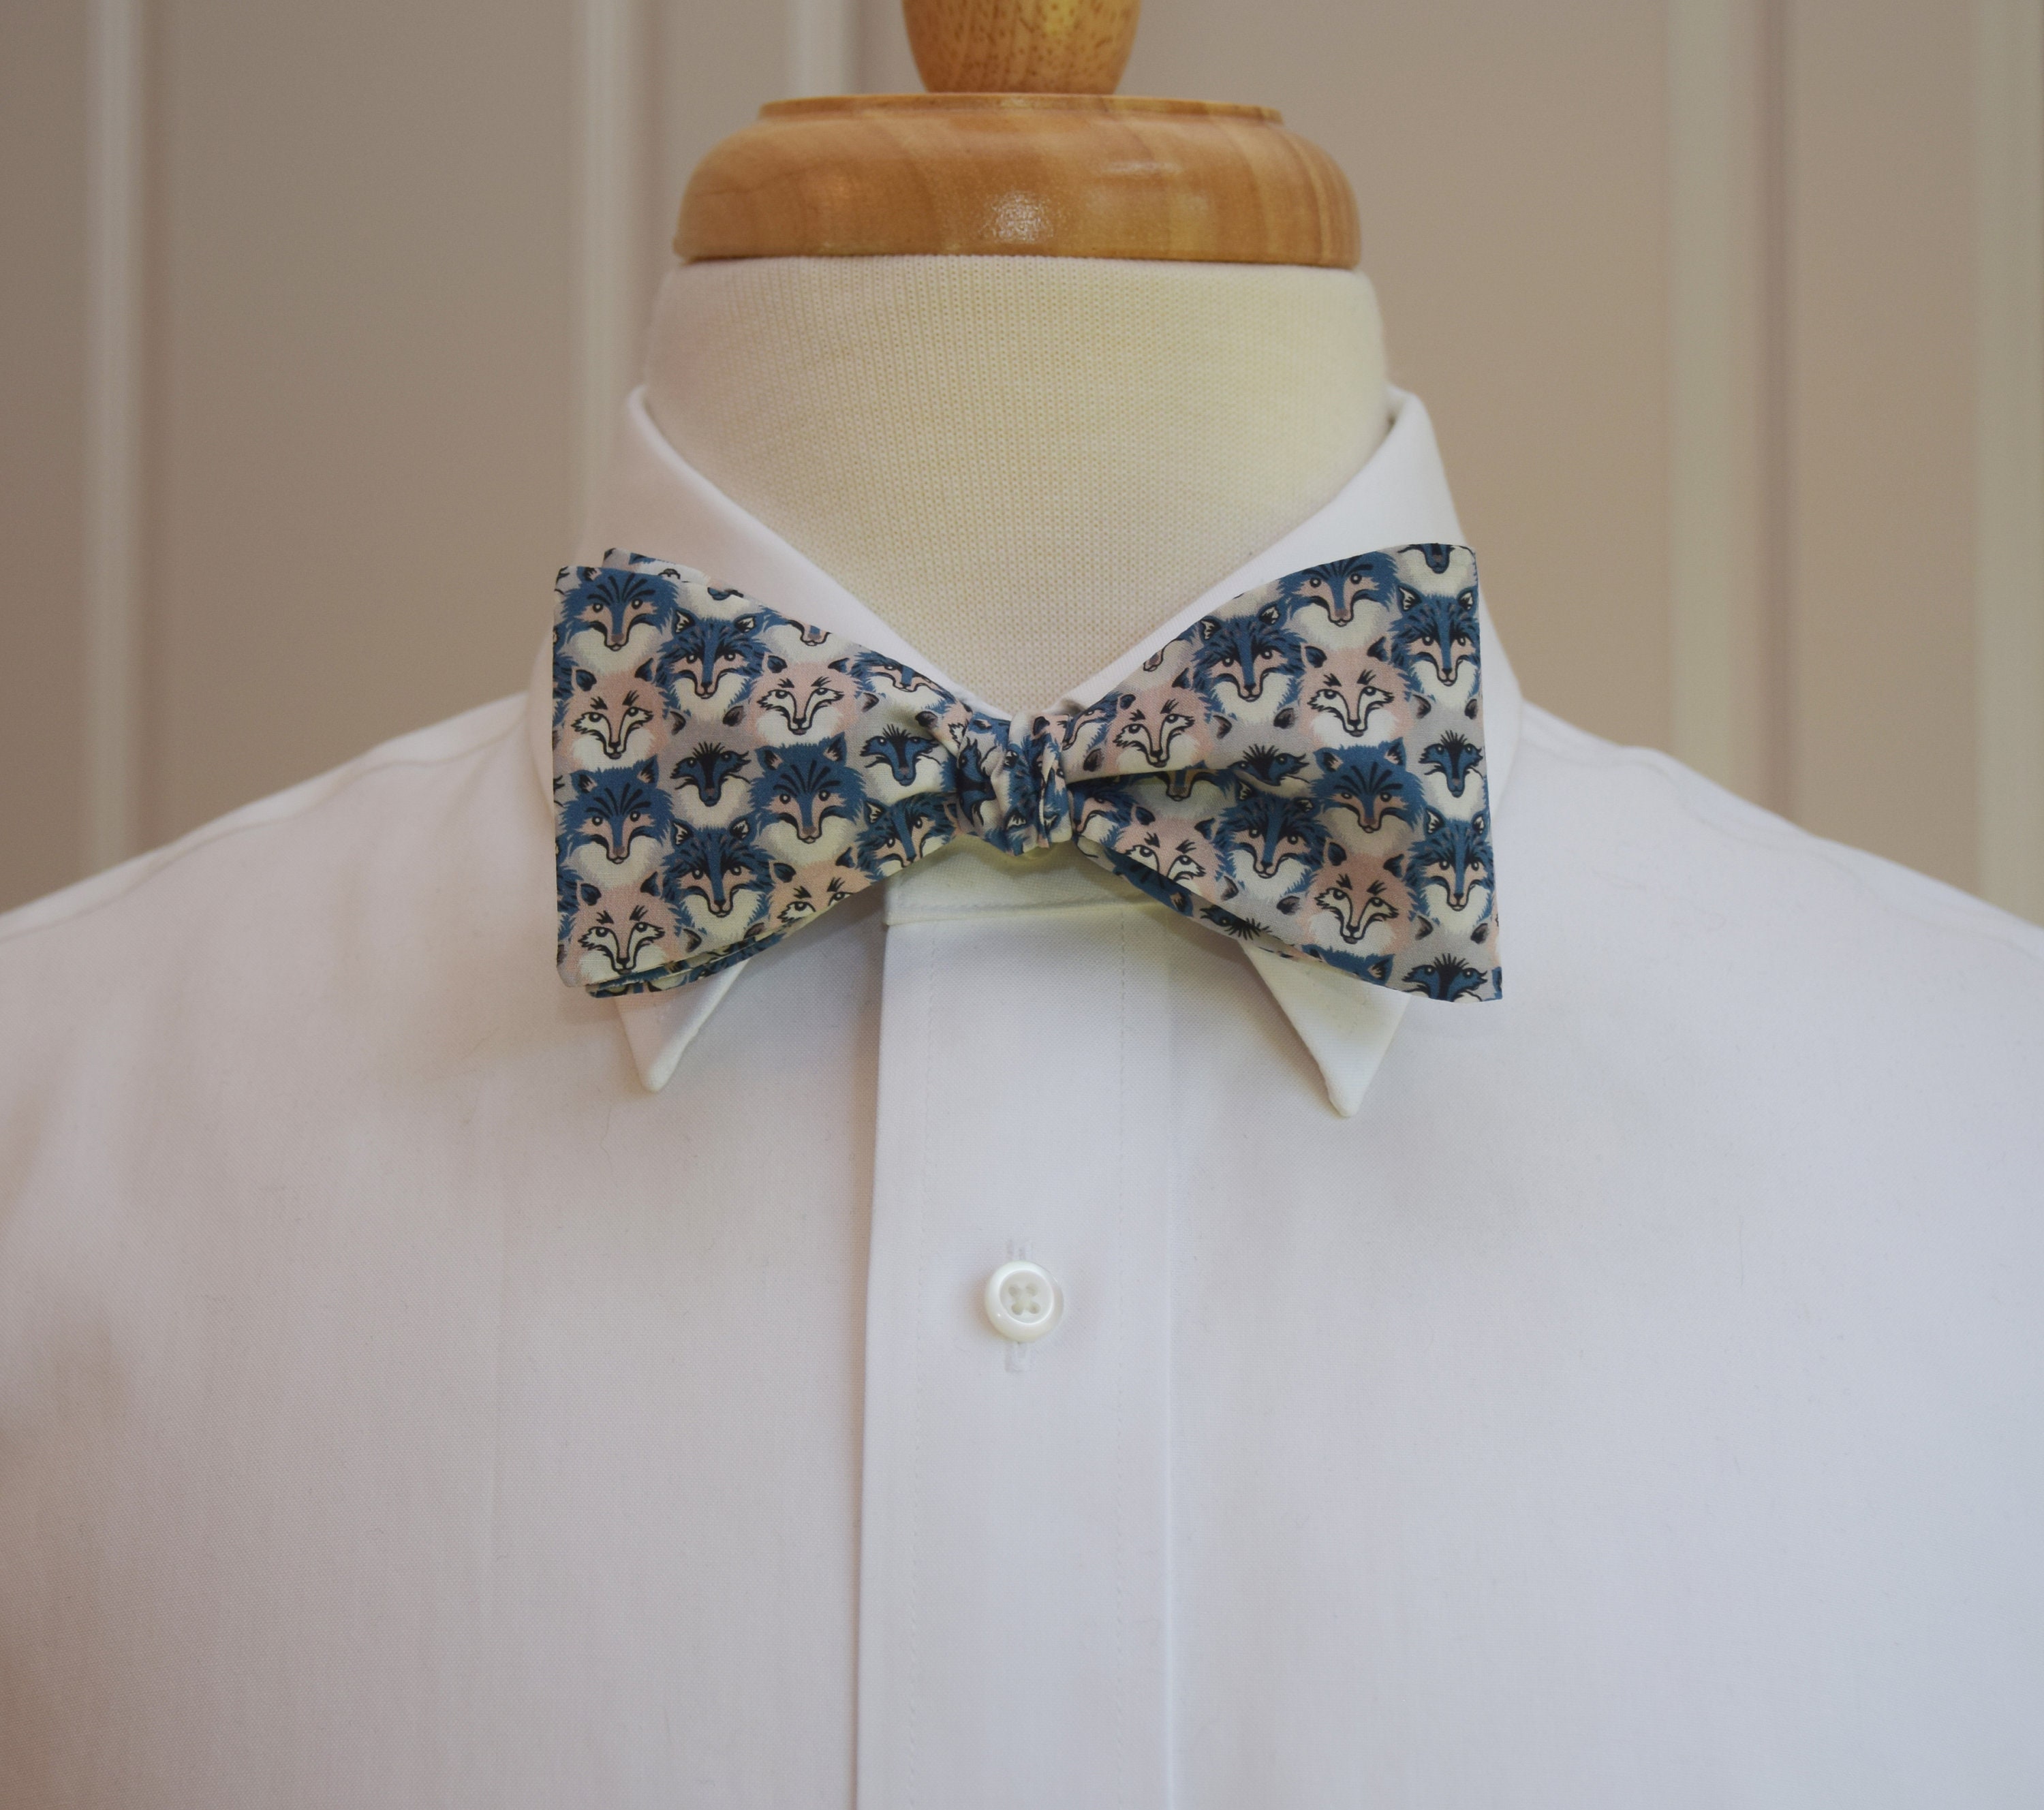 Bow Tie, Liberty of London, blue/beige/grey Wolf Pack design bow tie ...